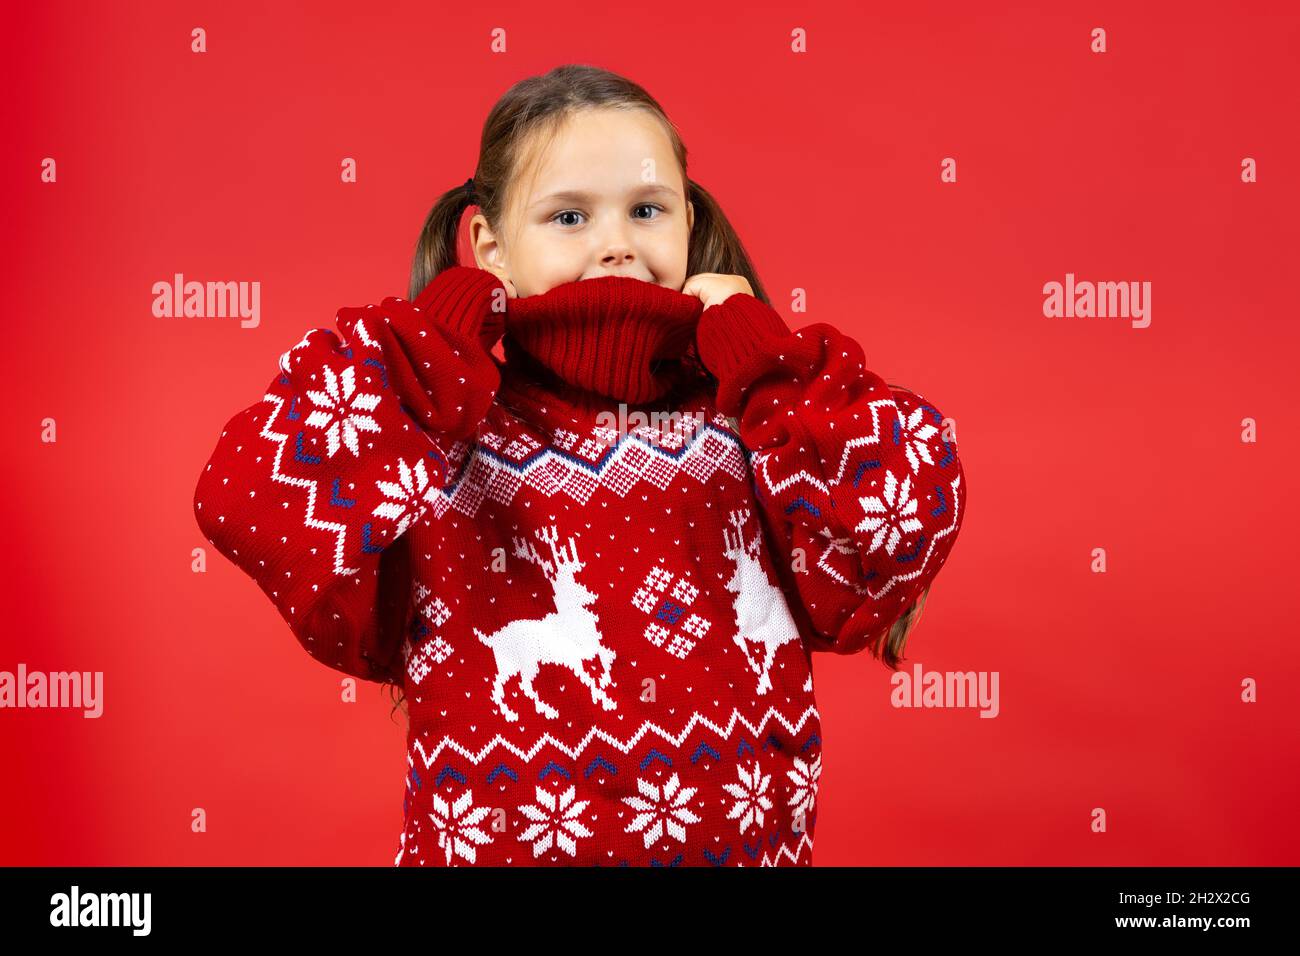 portrait of joyful girl wearing red Christmas sweater with reindeer , isolated on red background Stock Photo